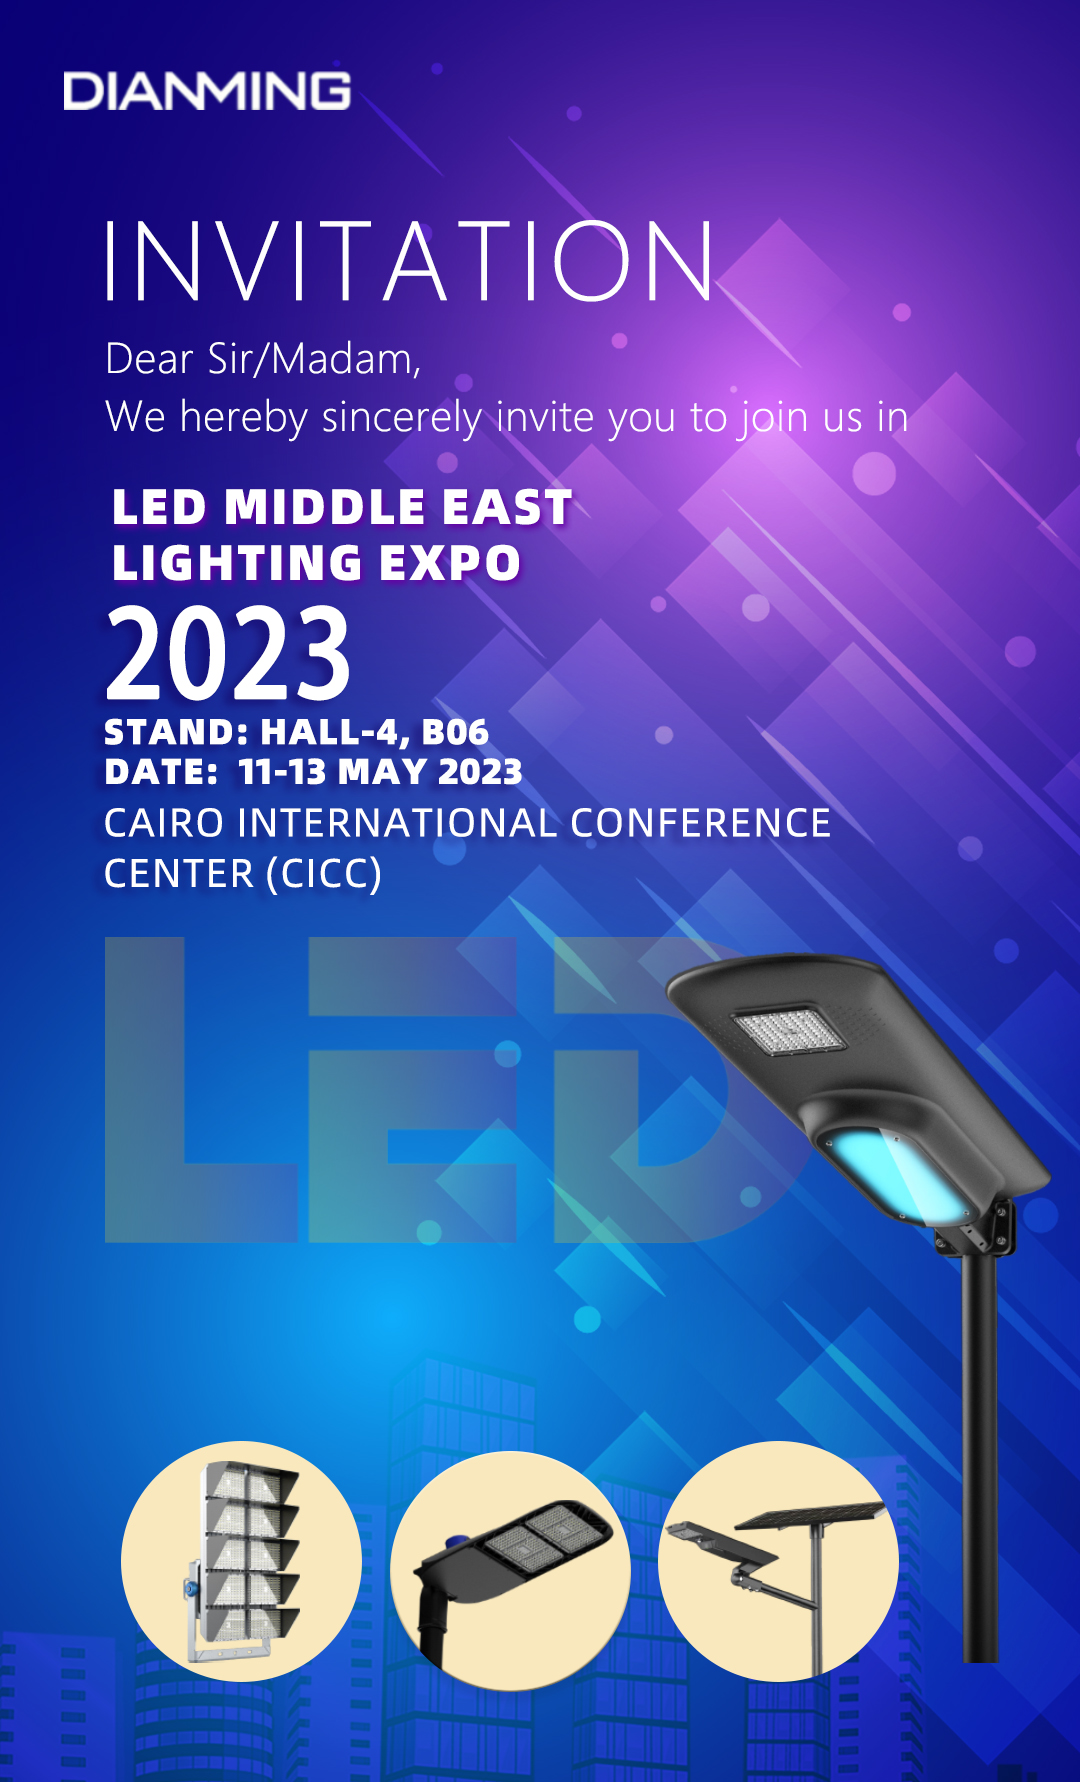 DIANMING-LED MIDDLE EAST LIGHTING EXPO